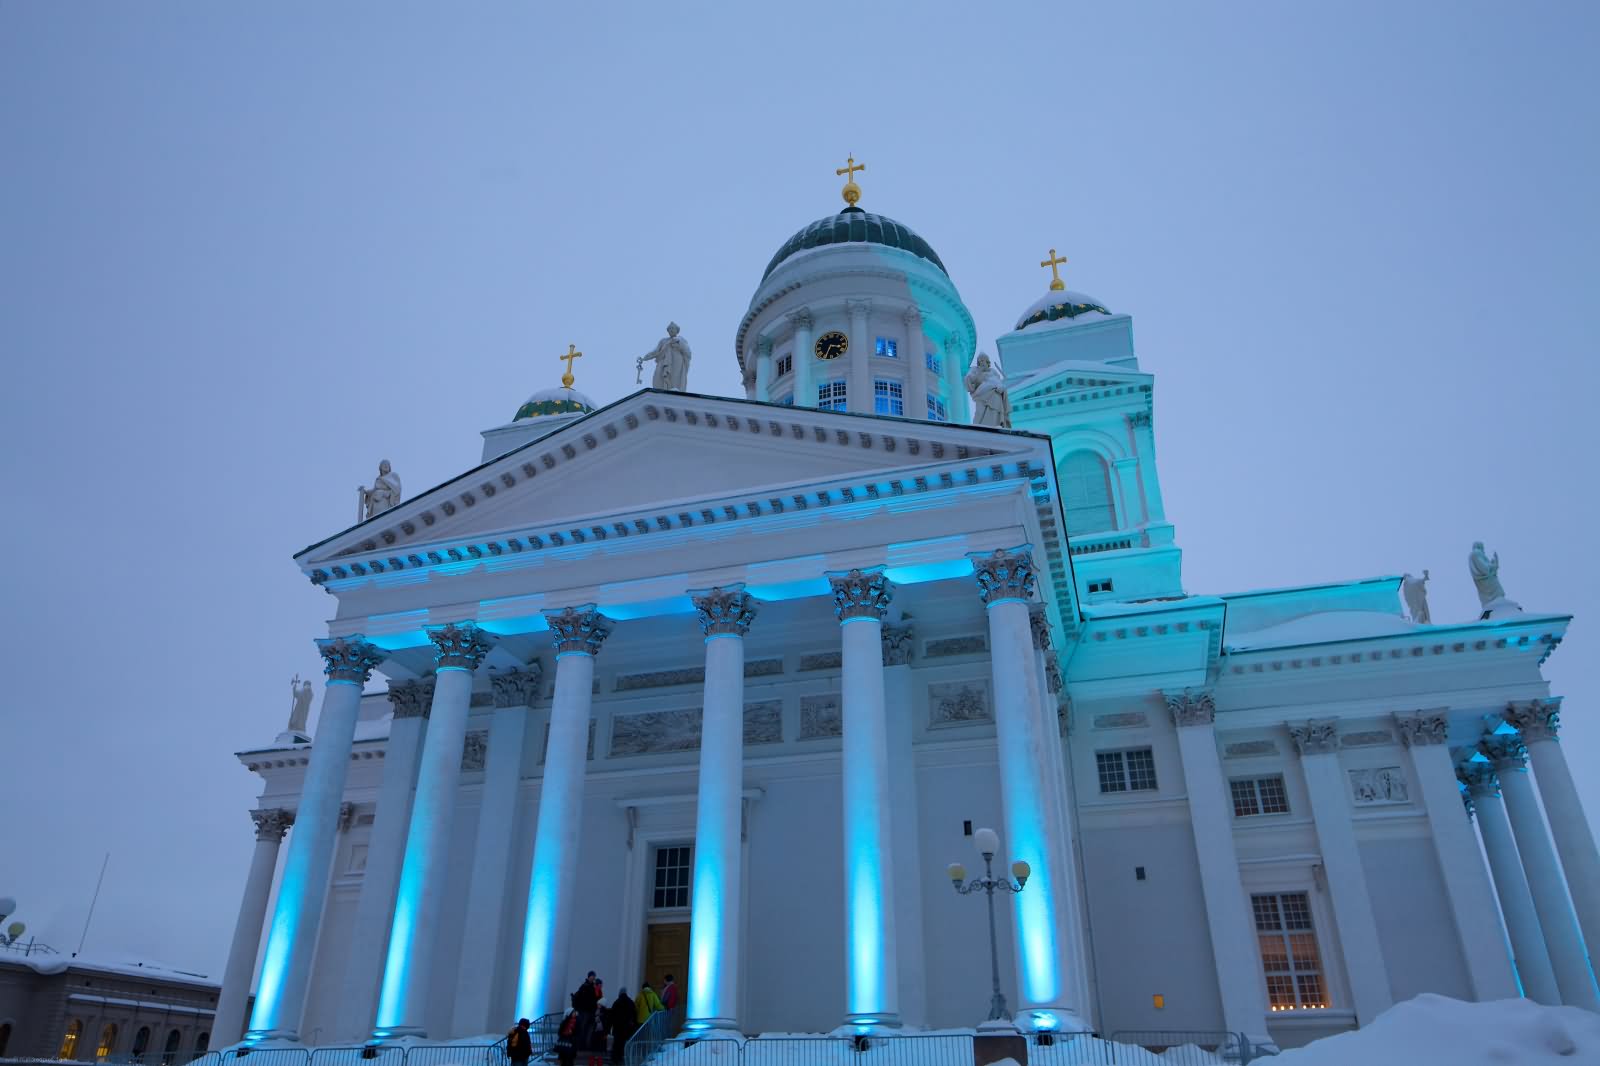 Blue Lights On The Helsinki Cathedral In Finland